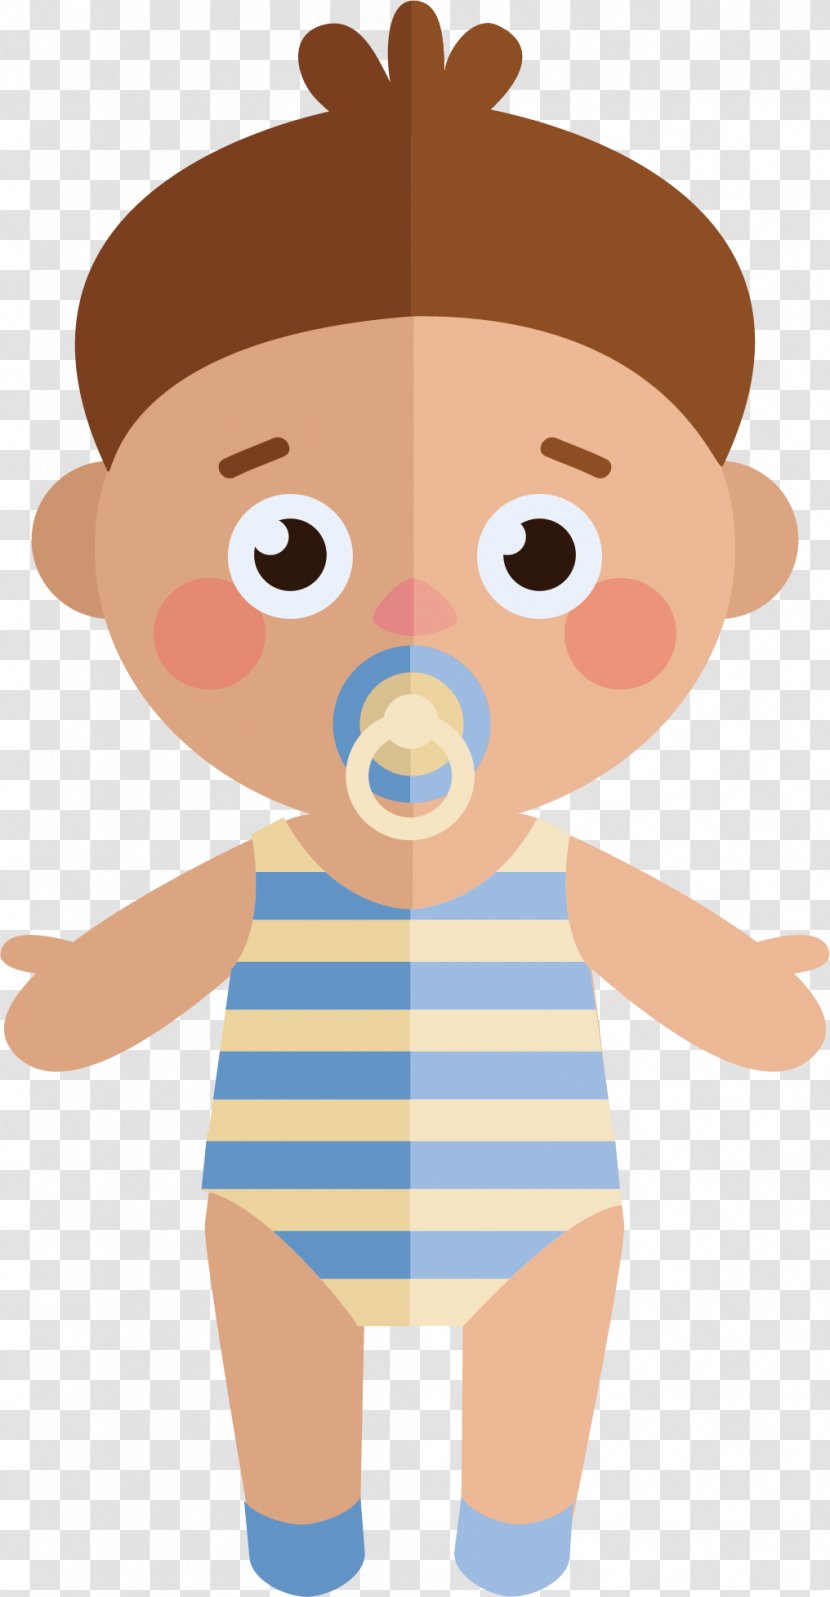 Diaper Pampers Childhood - Heart - Cute Child Vector Transparent PNG